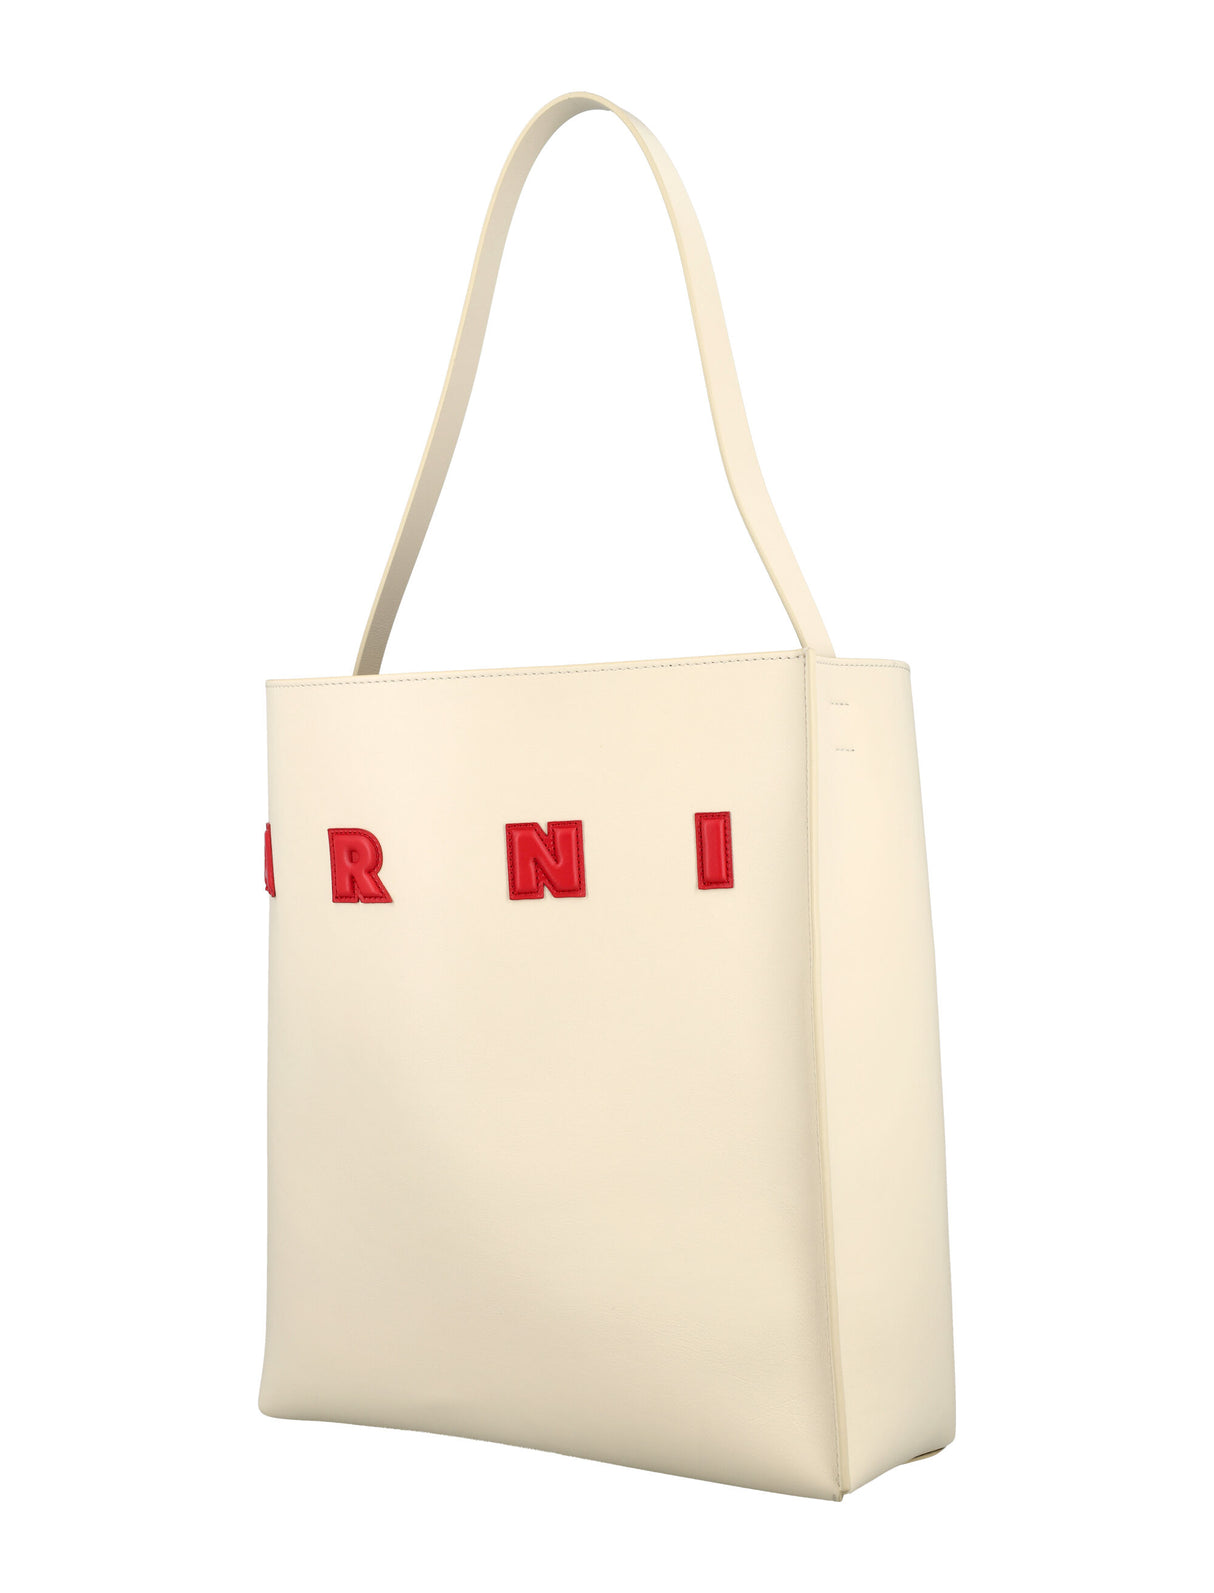 Leather Medium Museum Tote - Puffy Marni Patch Design, Unlined, Internal Zip Pocket